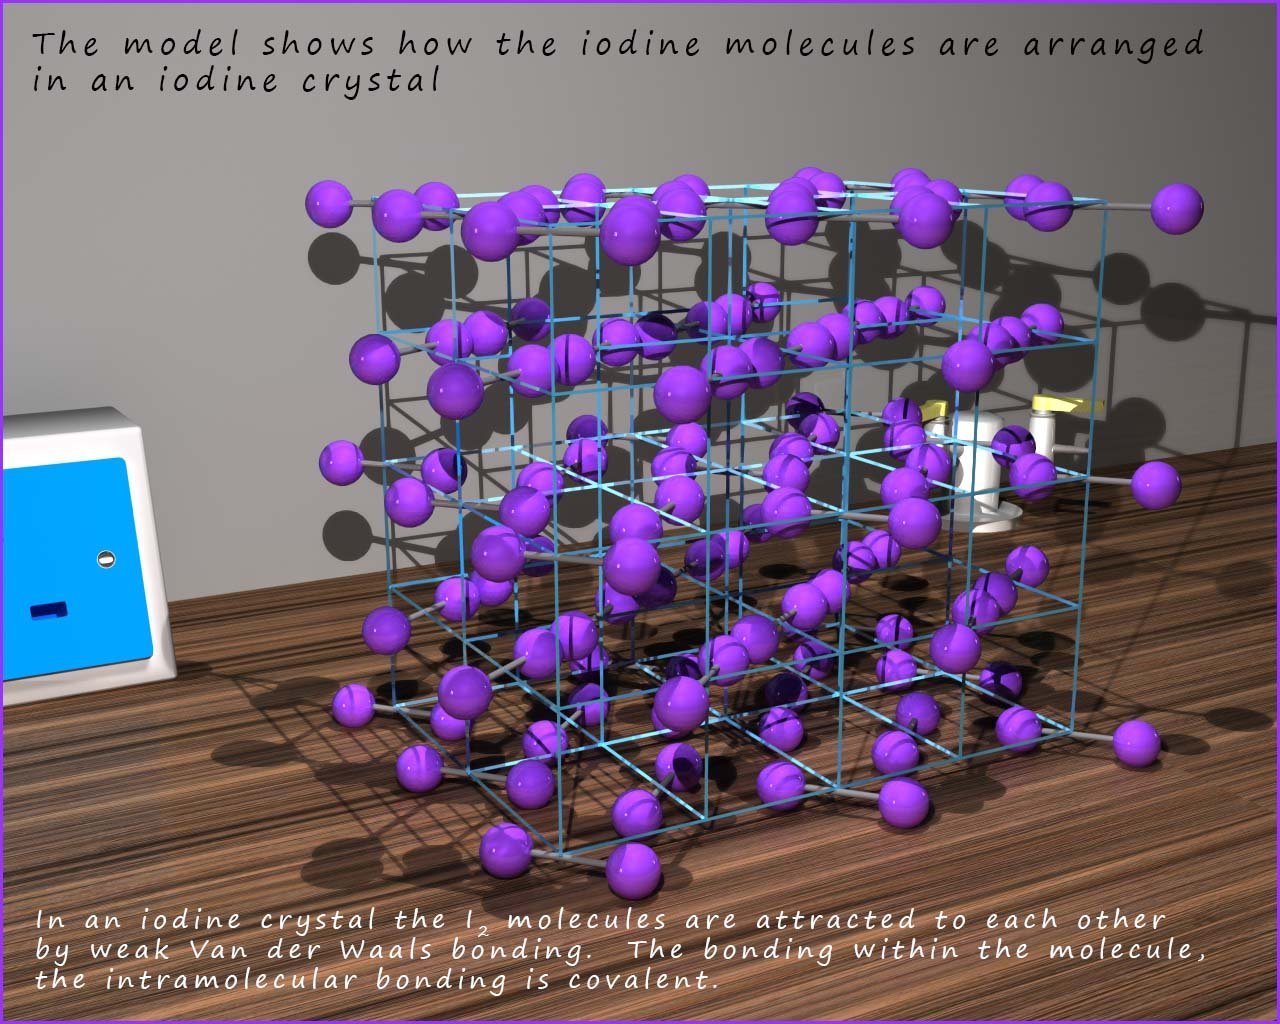 3d model showing the structure of an iodine crystal